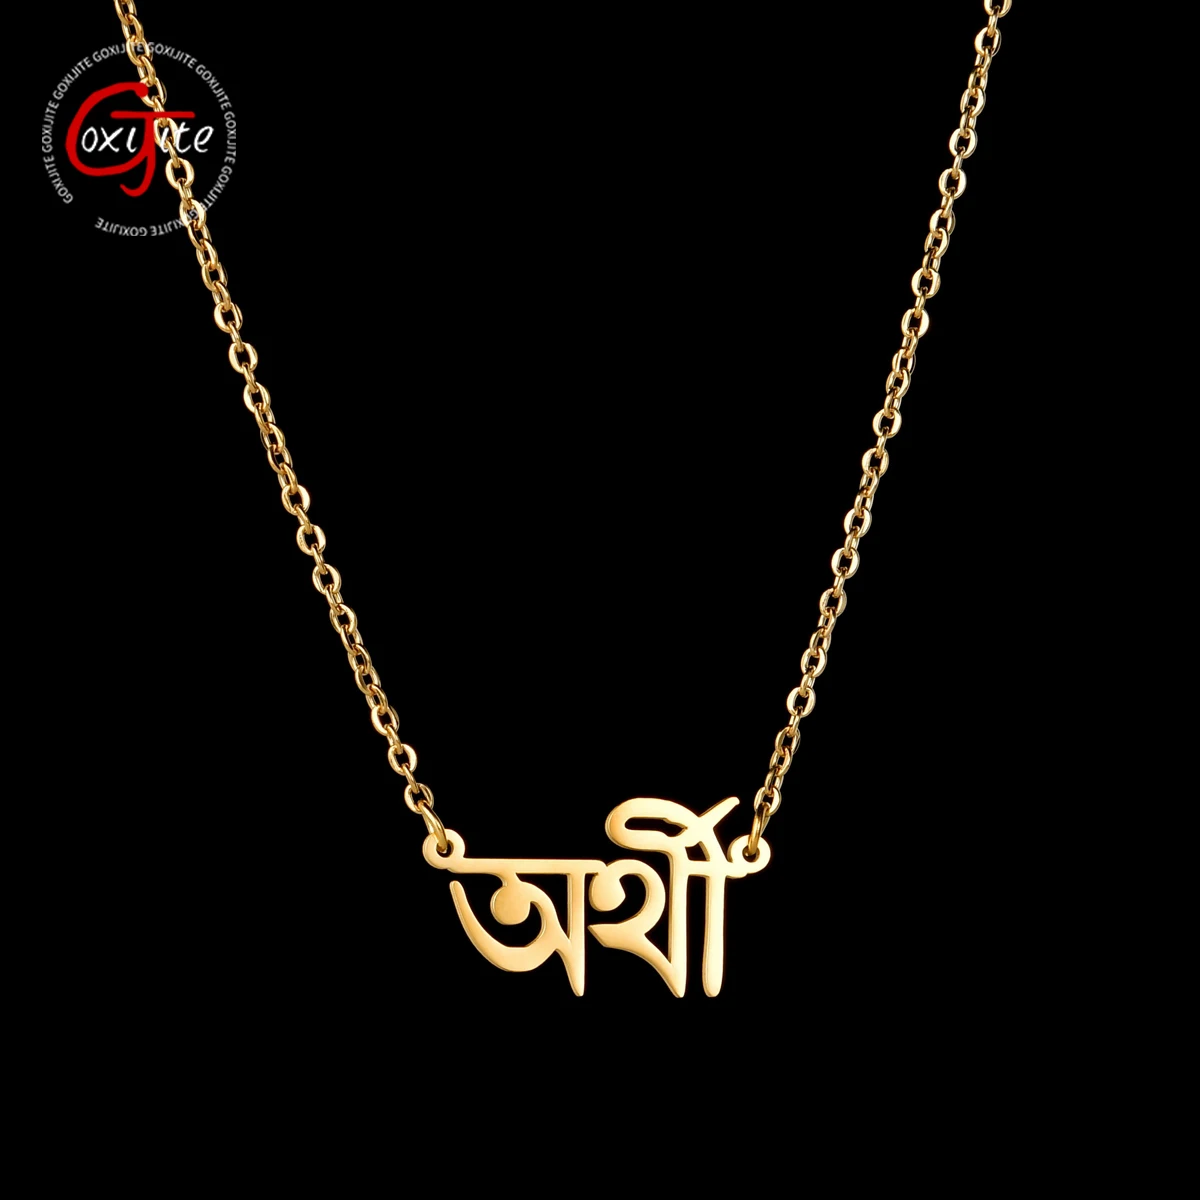 Goxijite Fashion Handmade Name Necklace For Women Customized Bengali Letter Nameplate Necklaces Accessories Gift